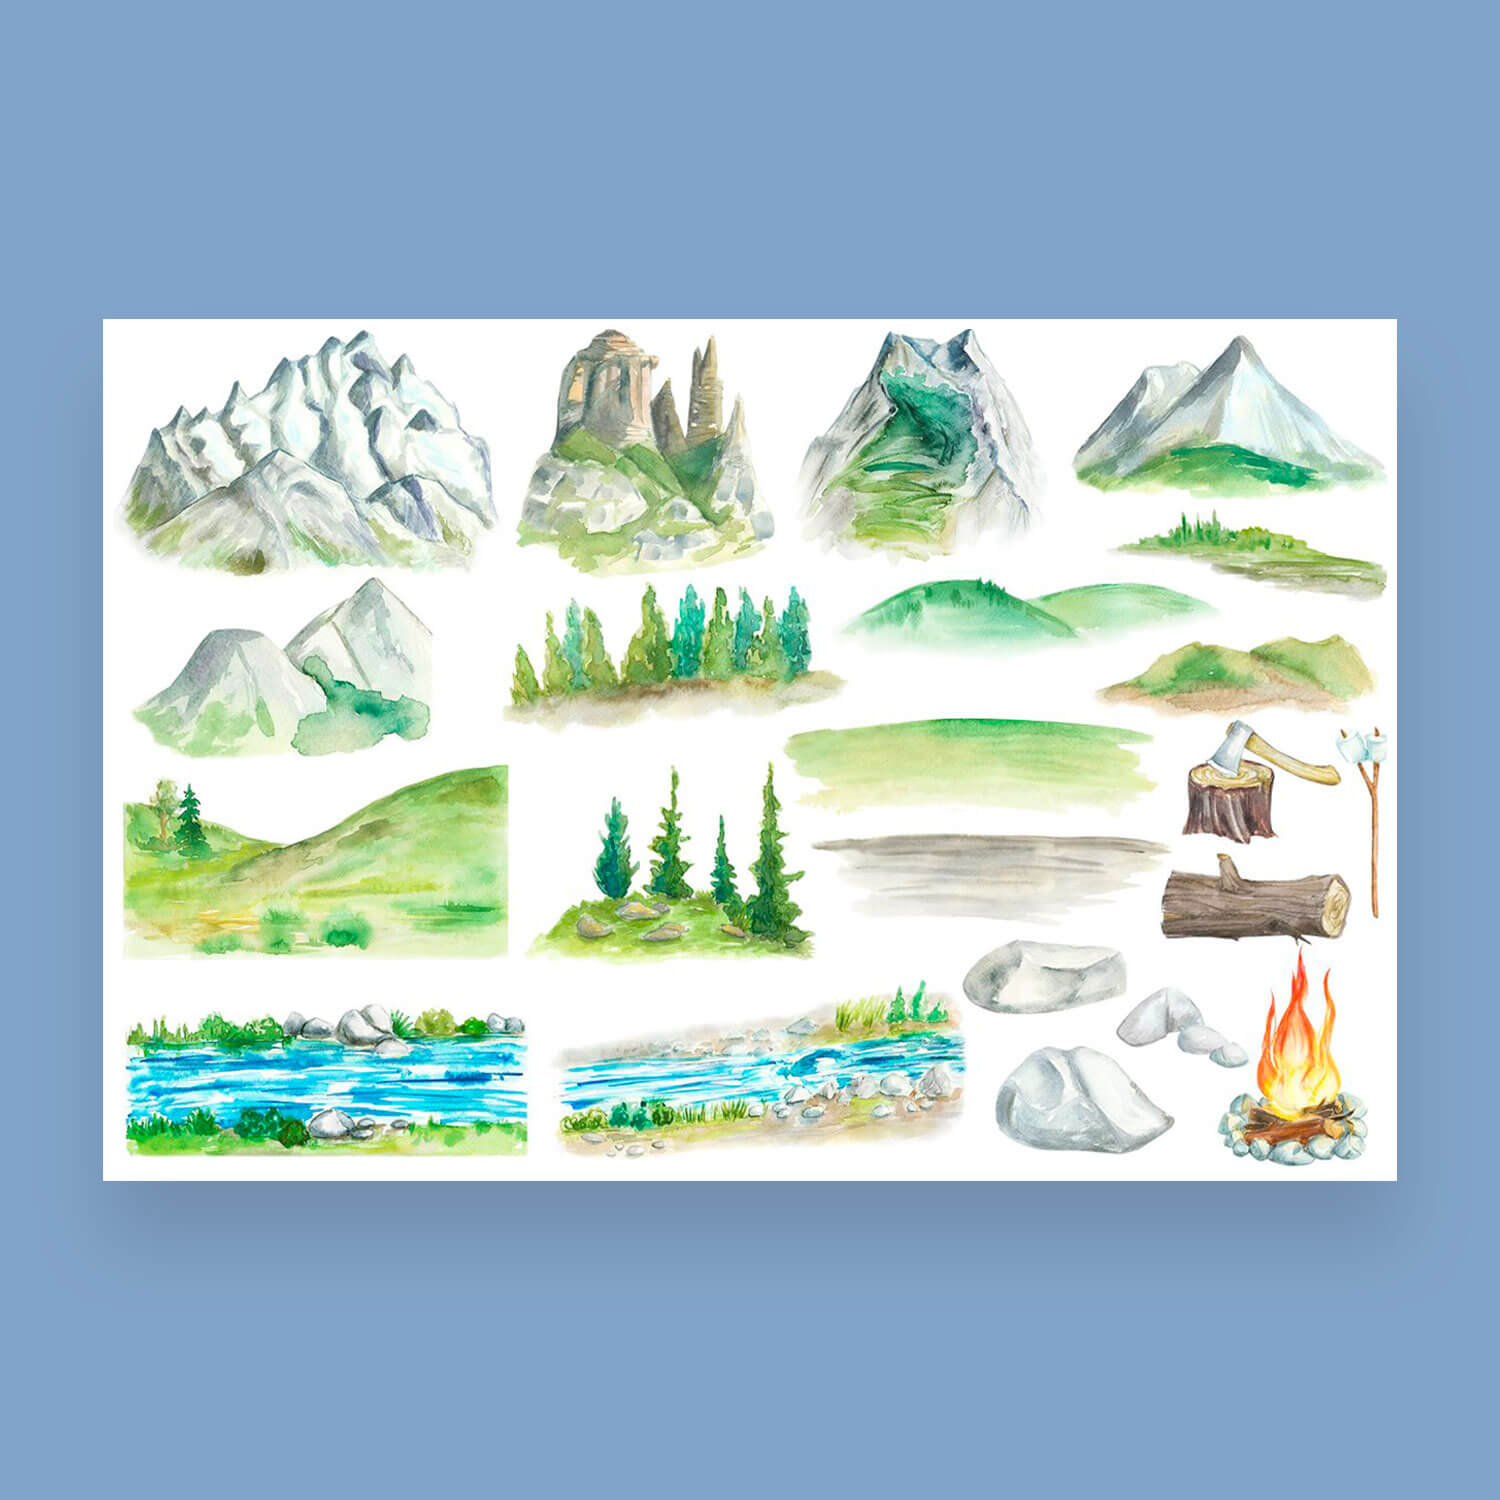 Collage of drawings with mountain and river, as well as mountains.